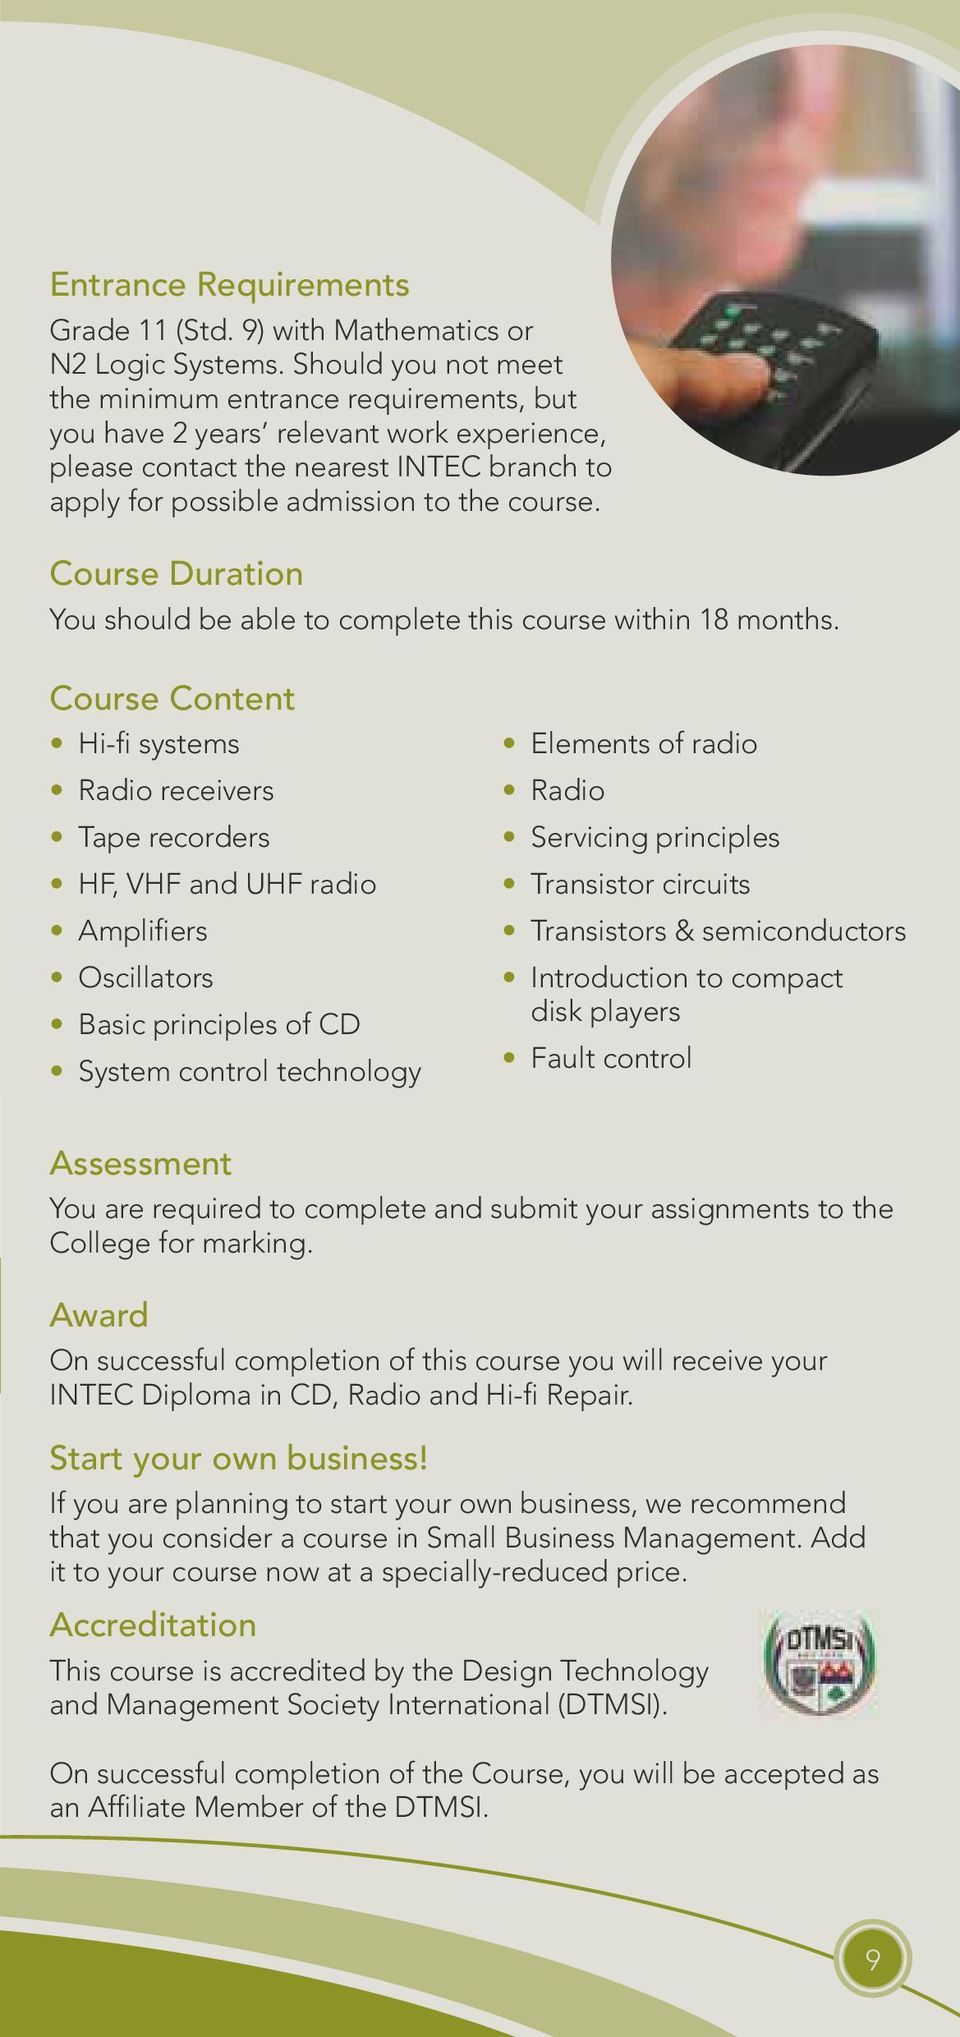 Course Duration You should be able to complete this course within 18 months.